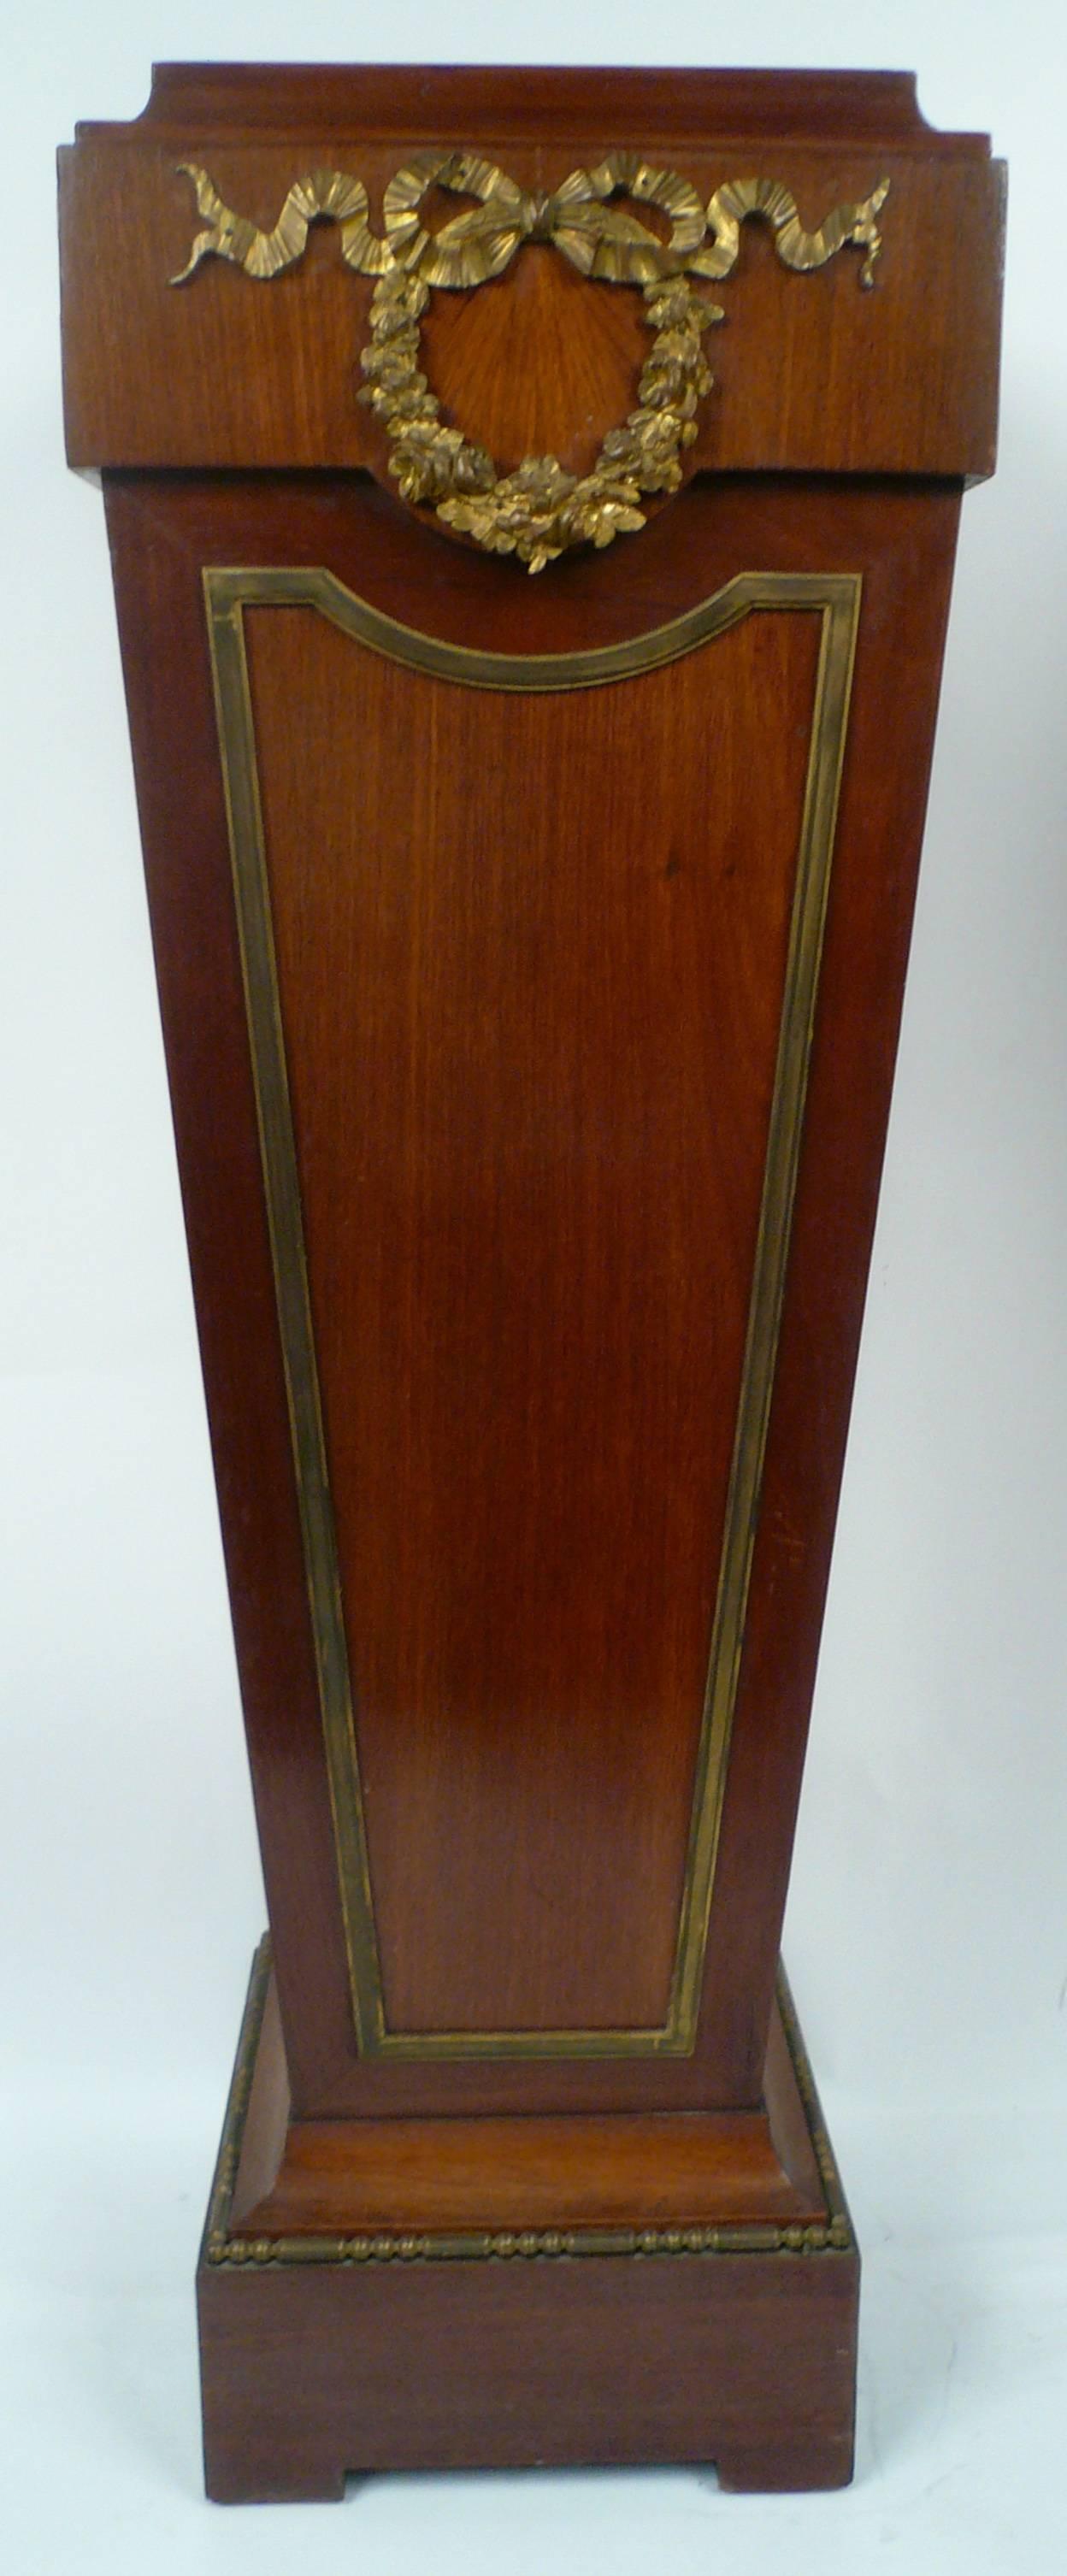 This finely proportioned pair of inlay mahogany stands, with bronze mounts date from the early 20th century.